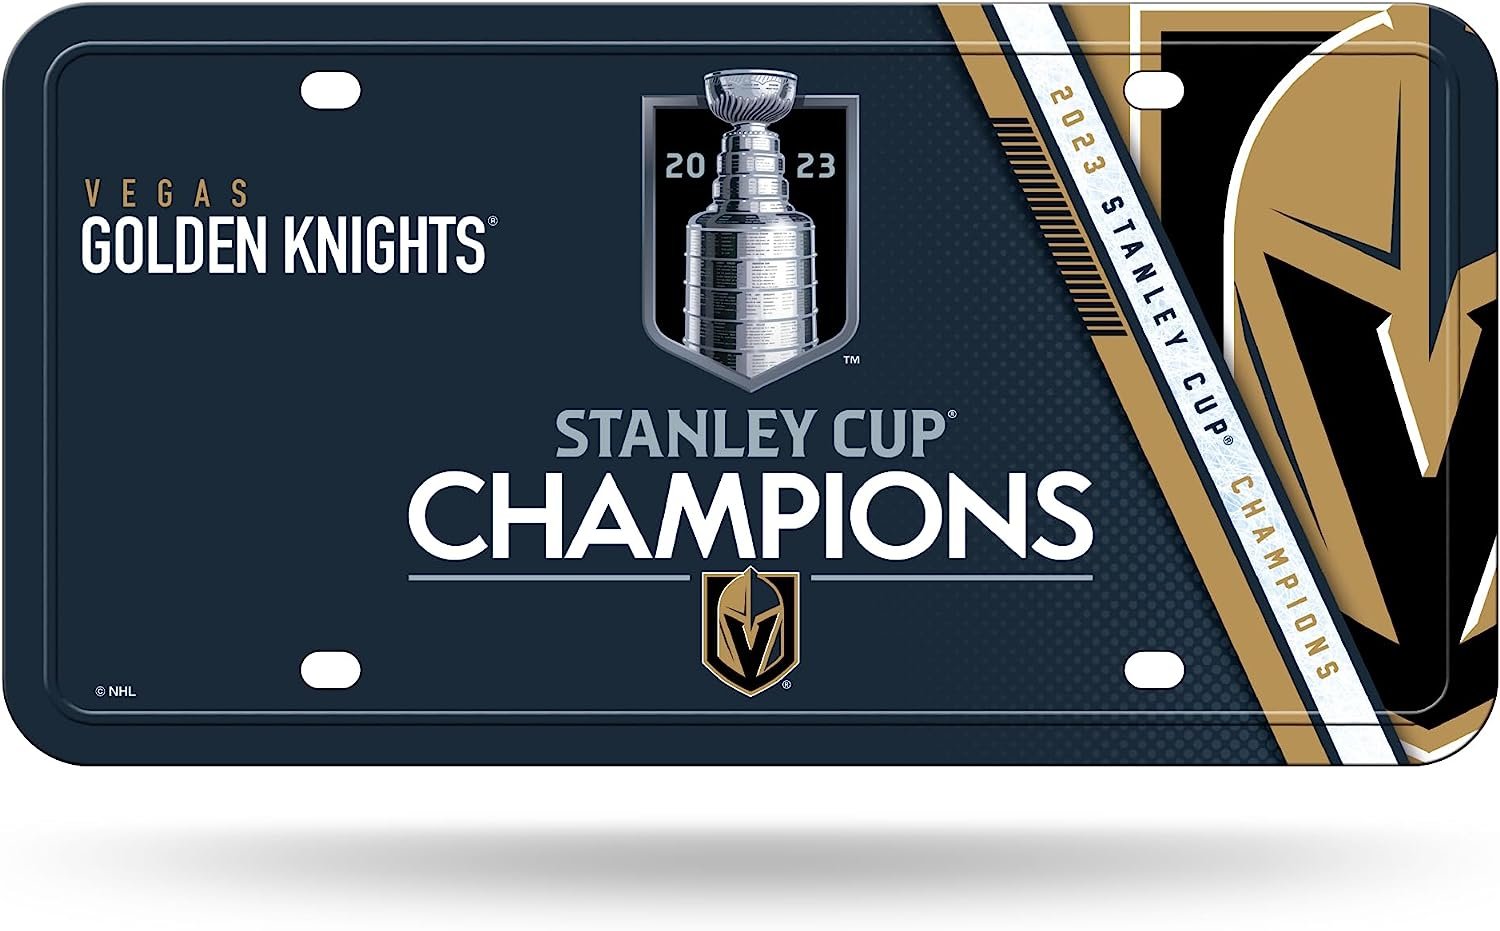 Vegas Golden Knights Metal Auto Tag License Plate, 2023 Stanley Cup Champions, 12x6 Inch